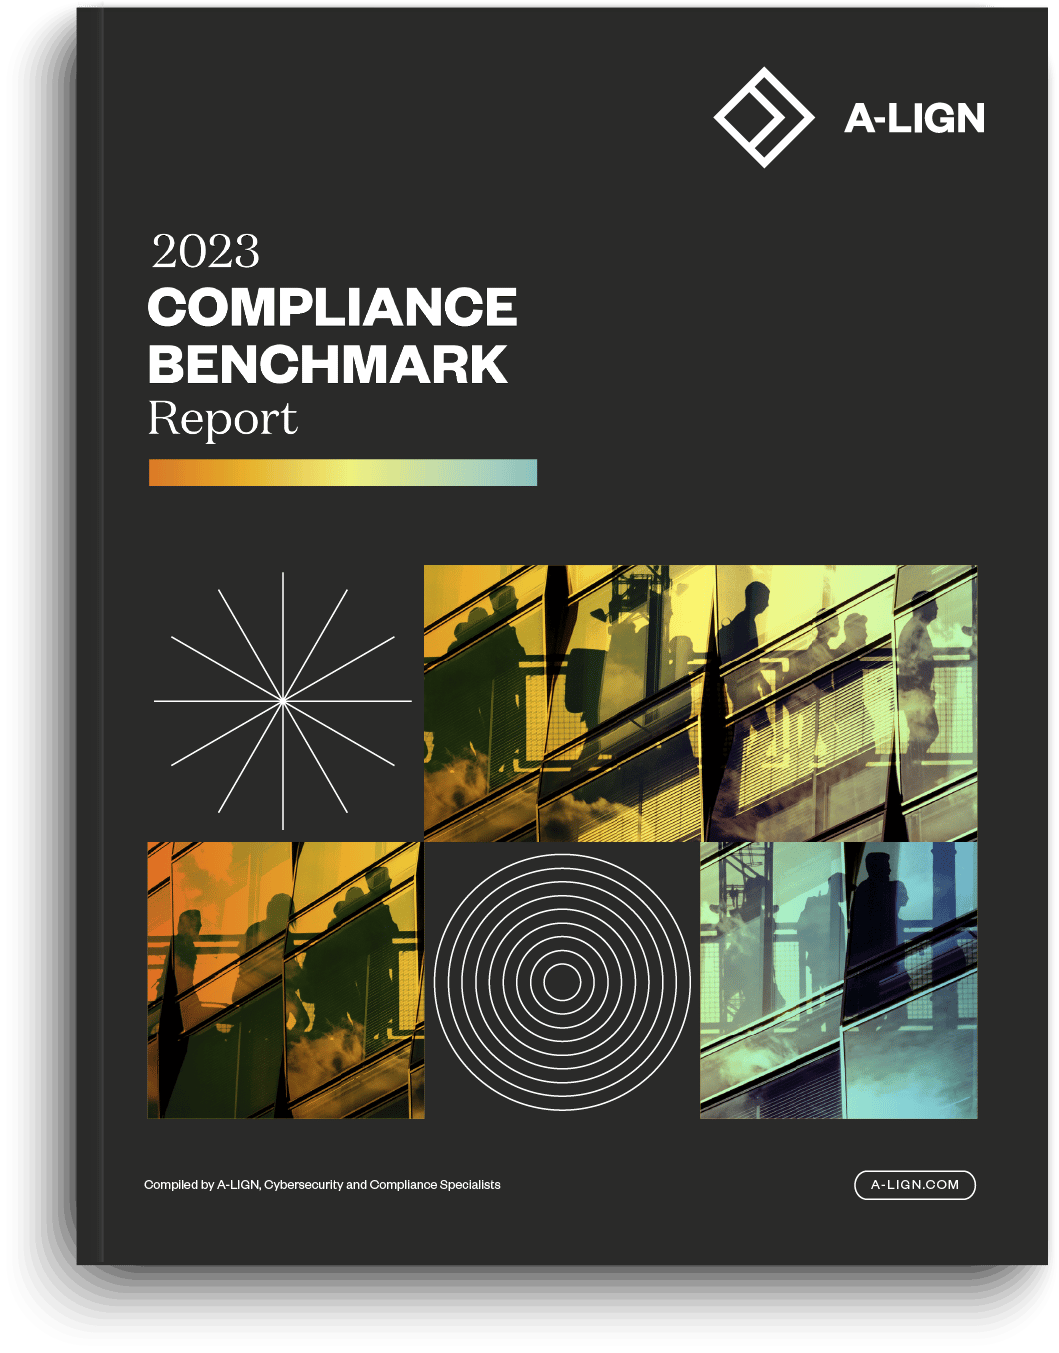 A-LIGN's 2023 Compliance Benchmark Report is now ready to download